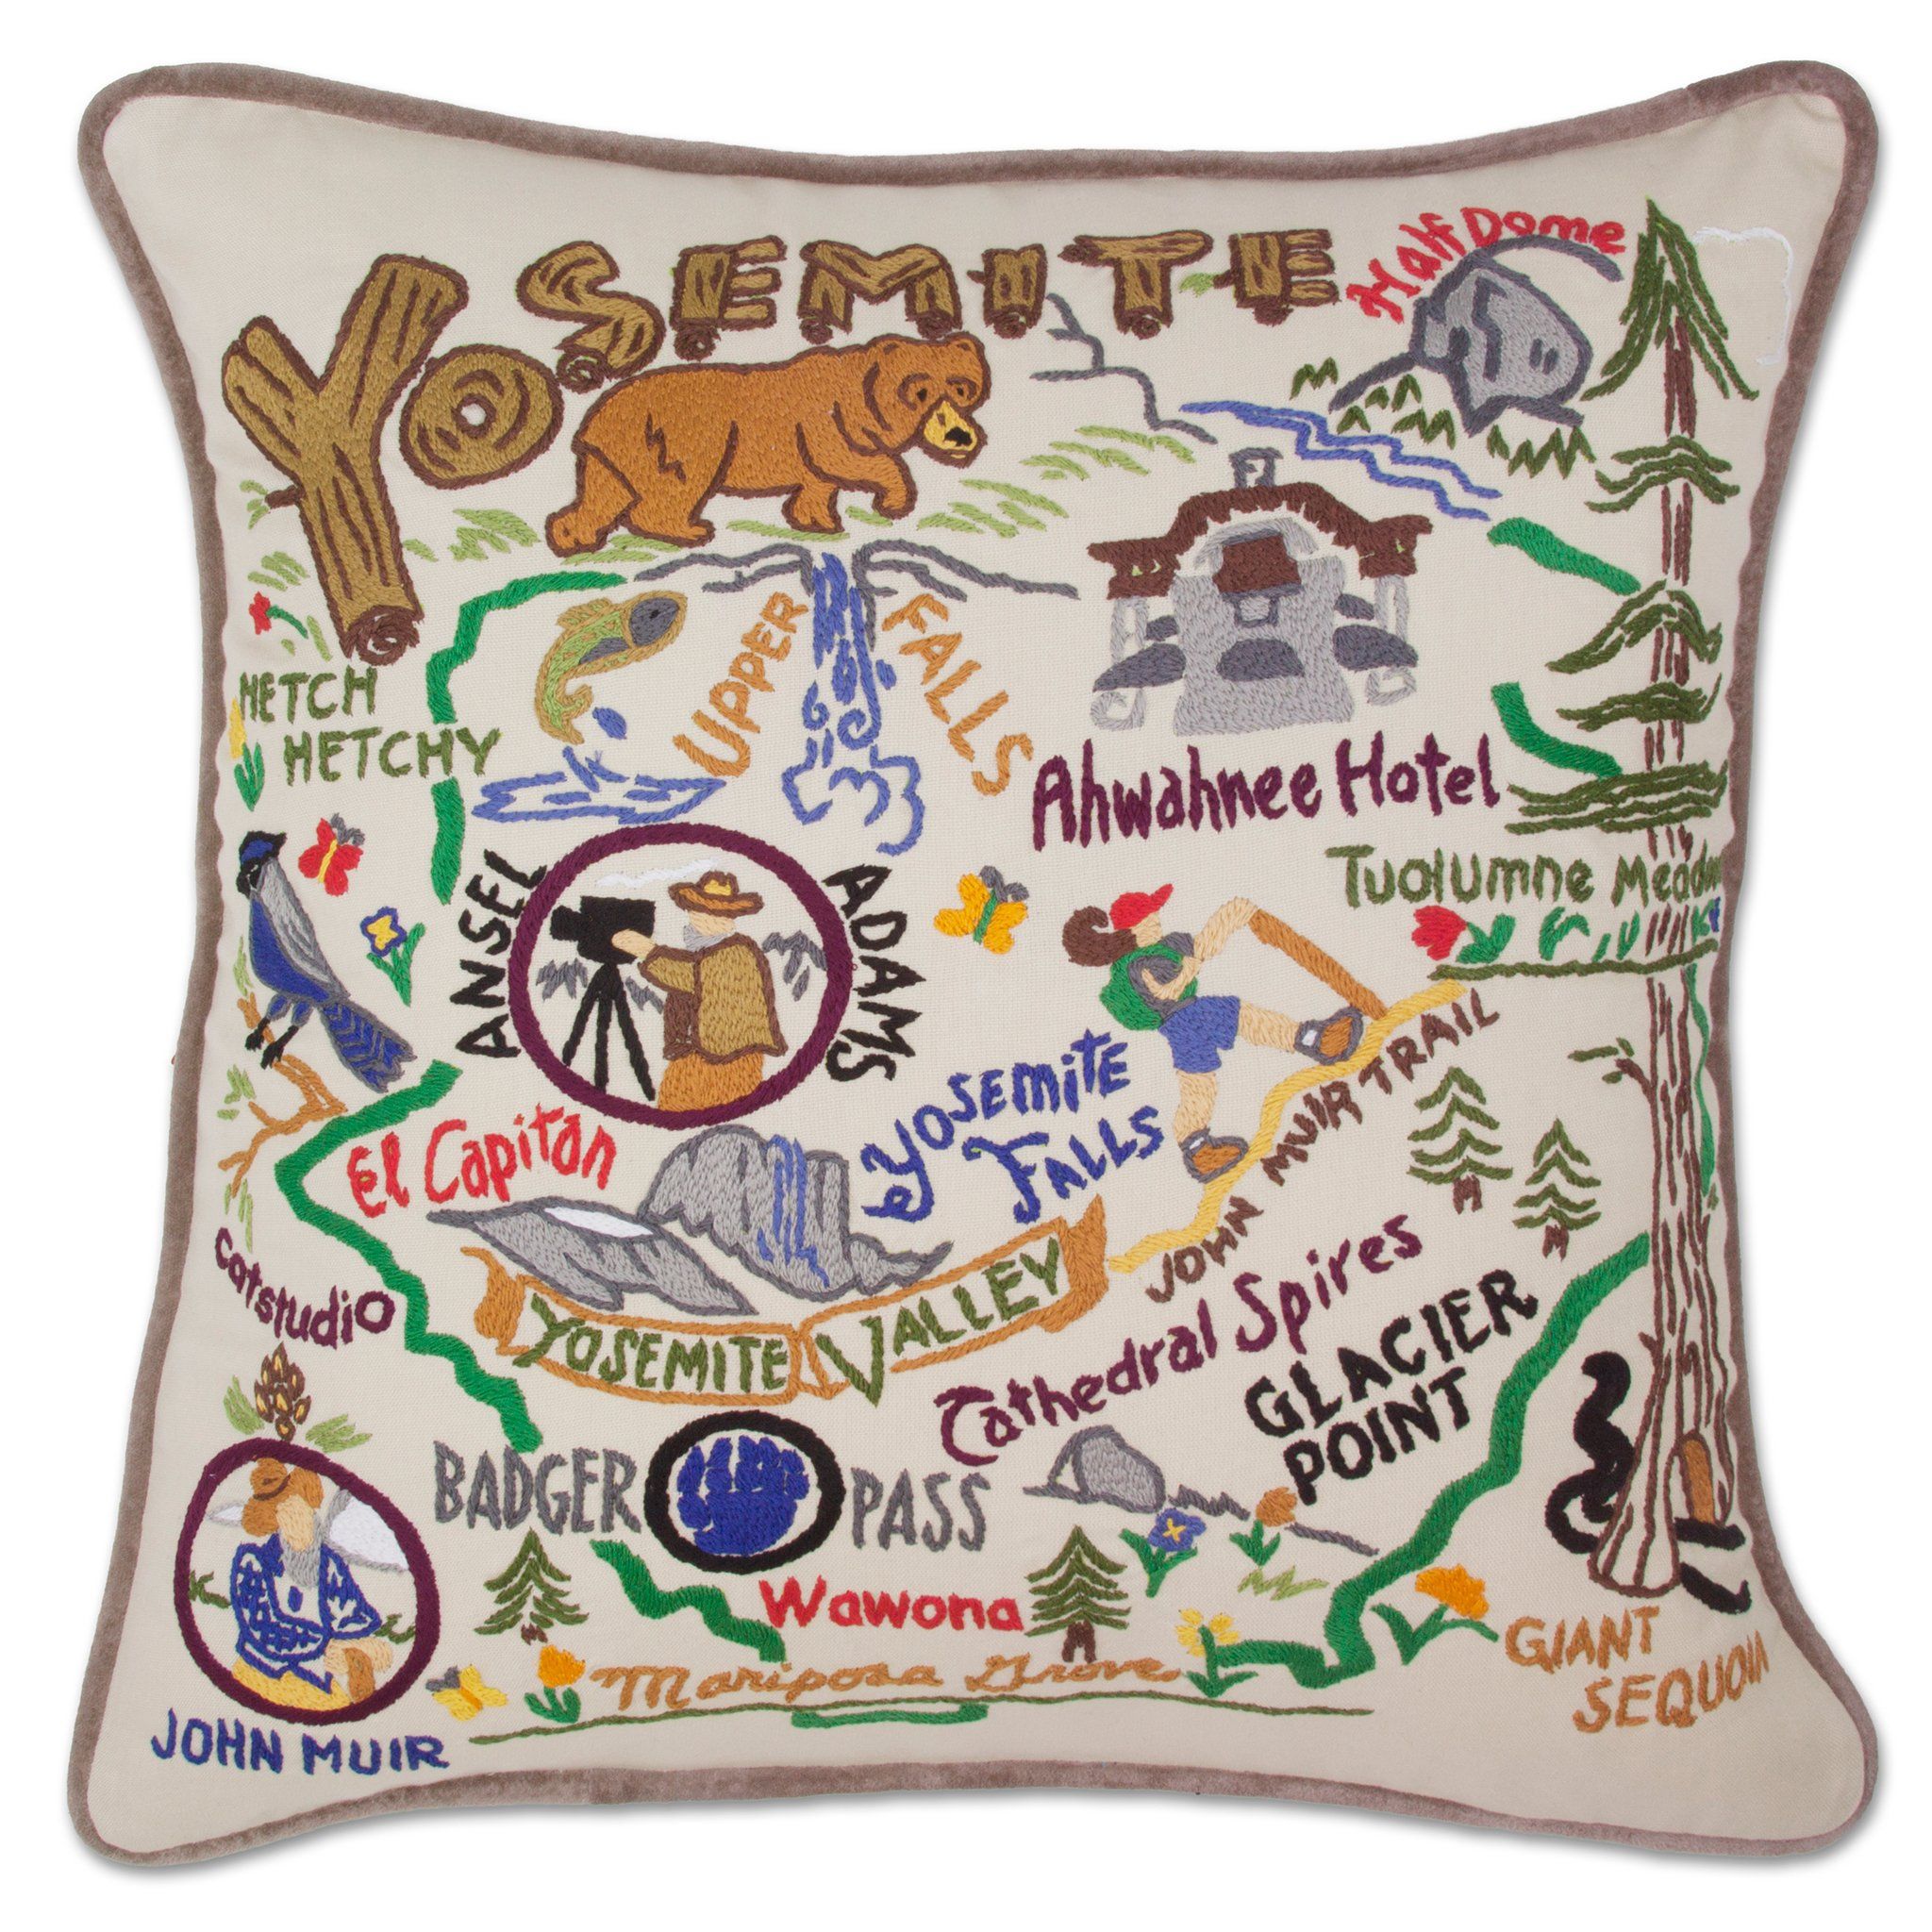 Latest Products 45.00 usd for Yosemite National Park Comfort Cushions  Boutiques